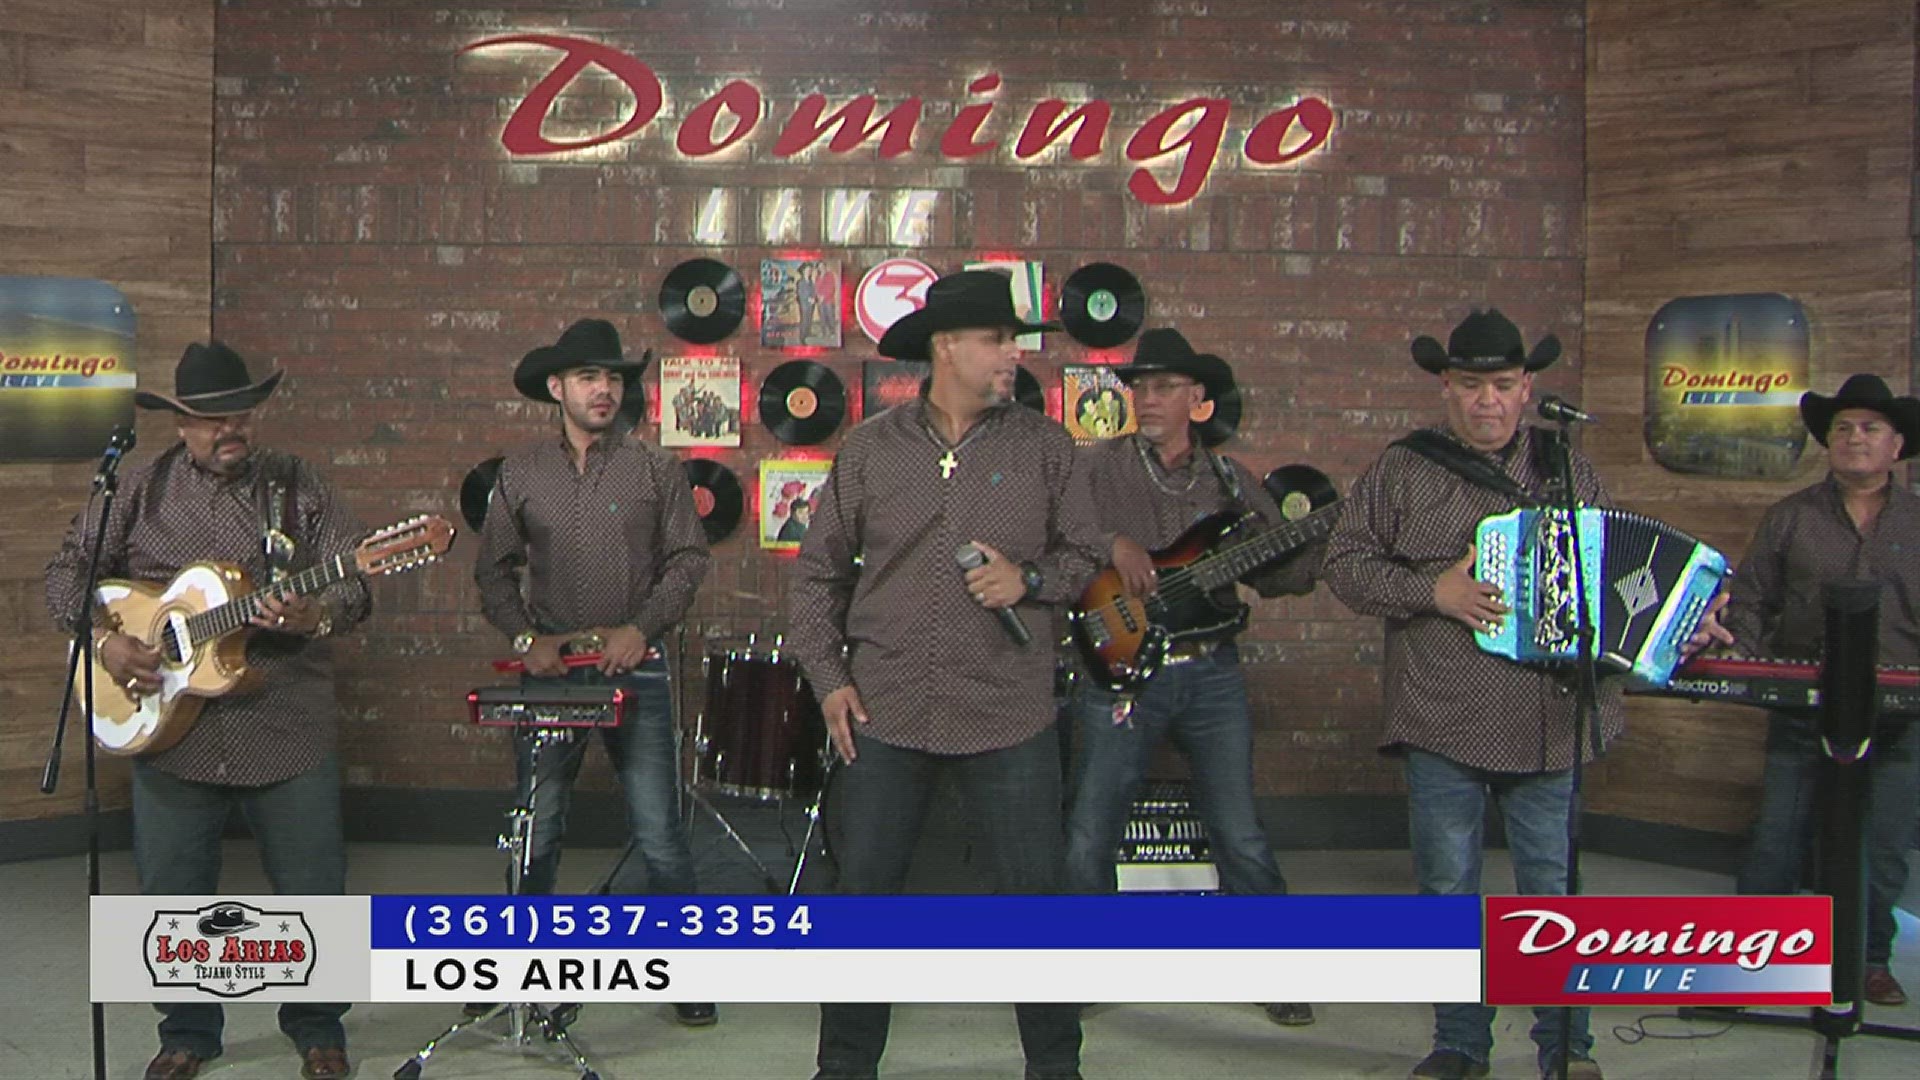 Robstown-based Tejano band Los Arias joined us on Domingo Live to perform their song "Te Amo."